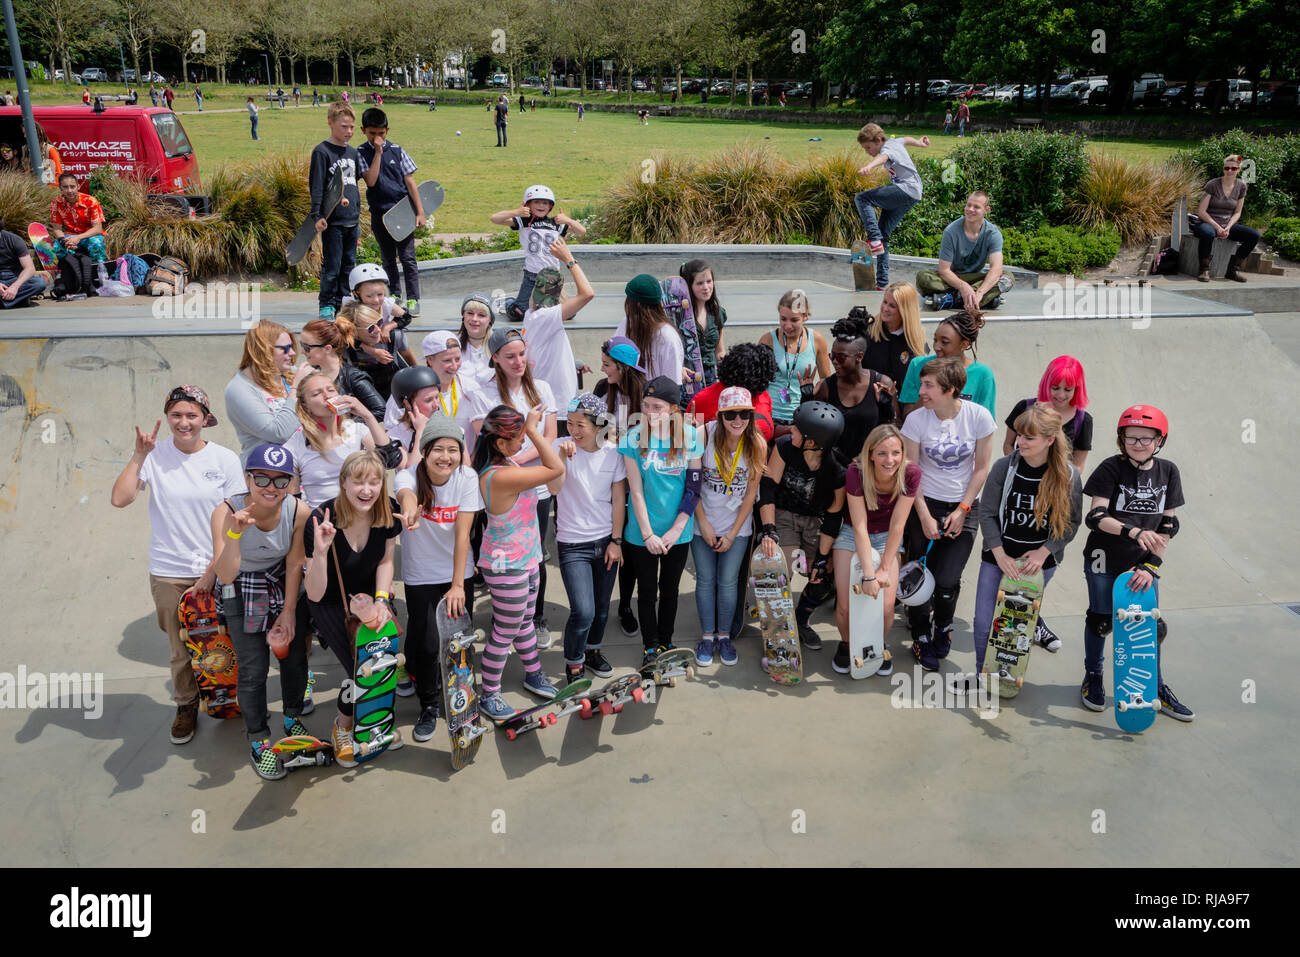 A group of female skaters posing for a photograph at The Level Skatepark in Brighton, East Sussex, England. Stock Photo